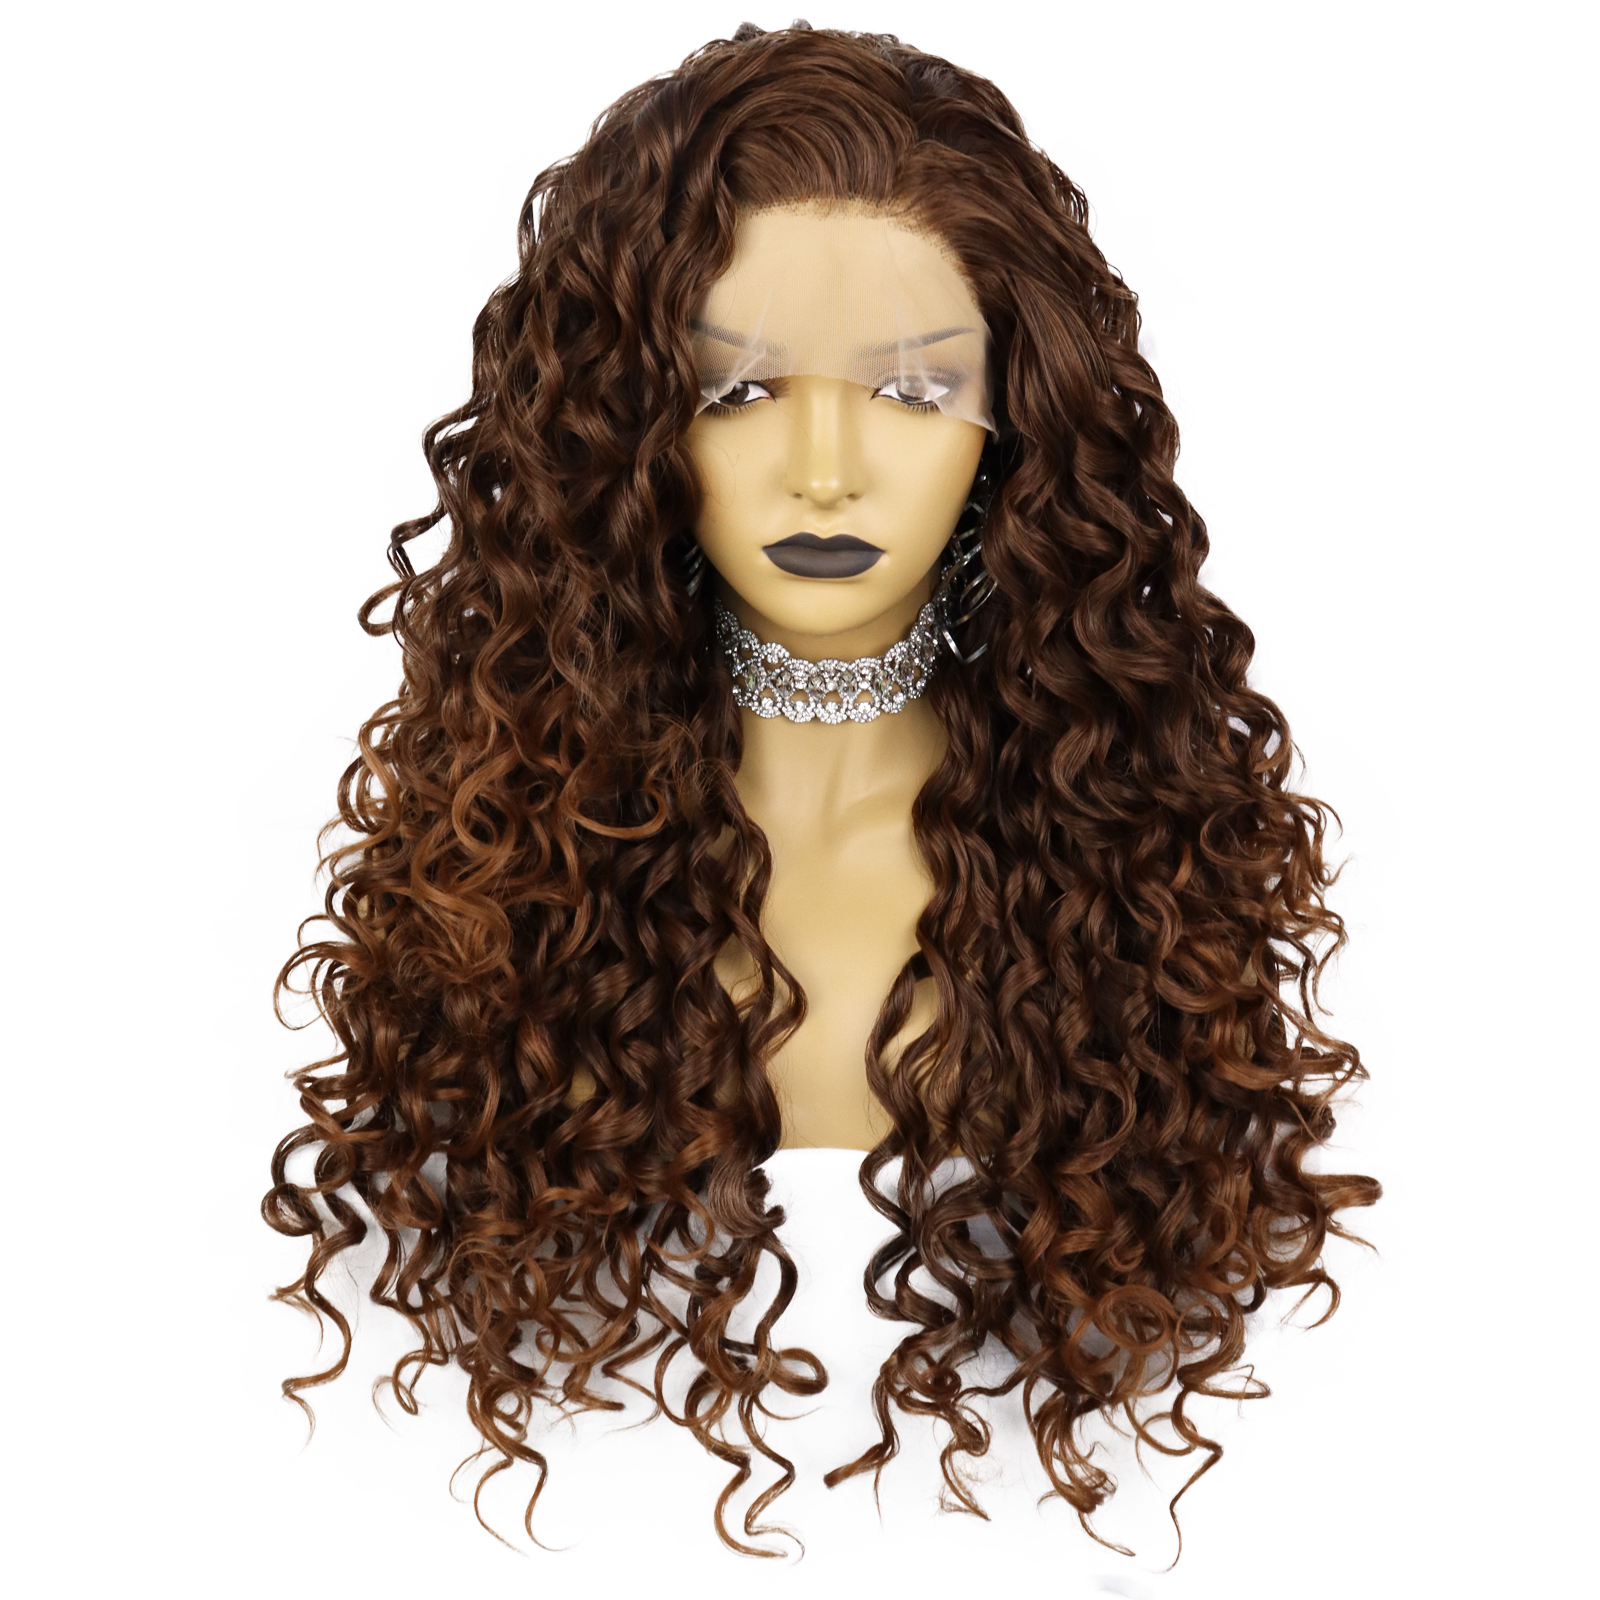 13 2 5 Mix Brown Curly Synthetic Lace Wig For Women